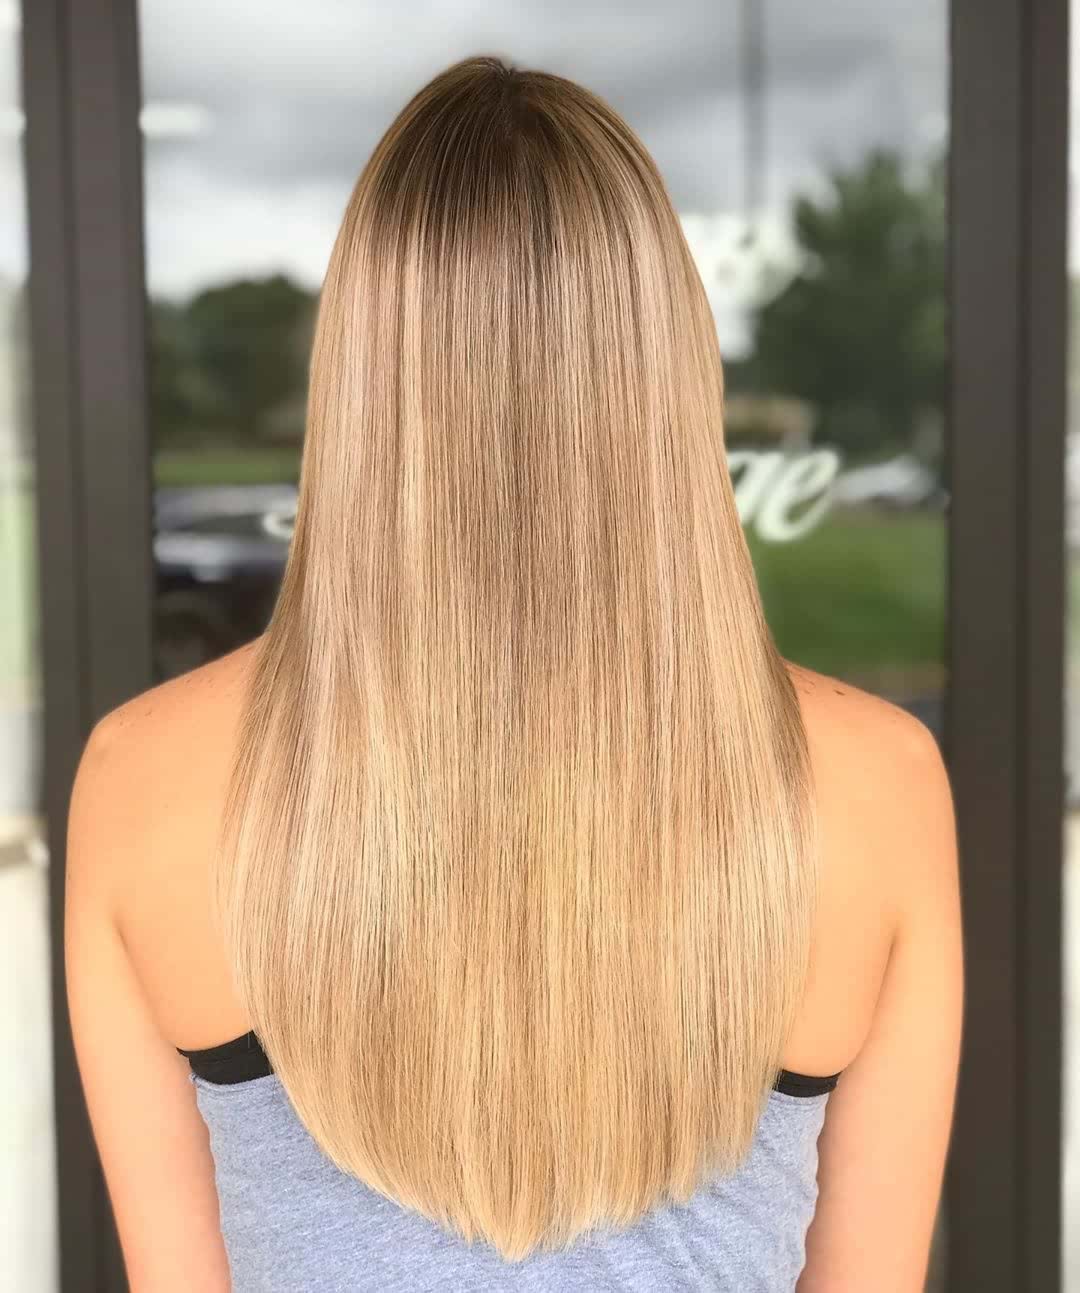 long straight hairstyle for girls